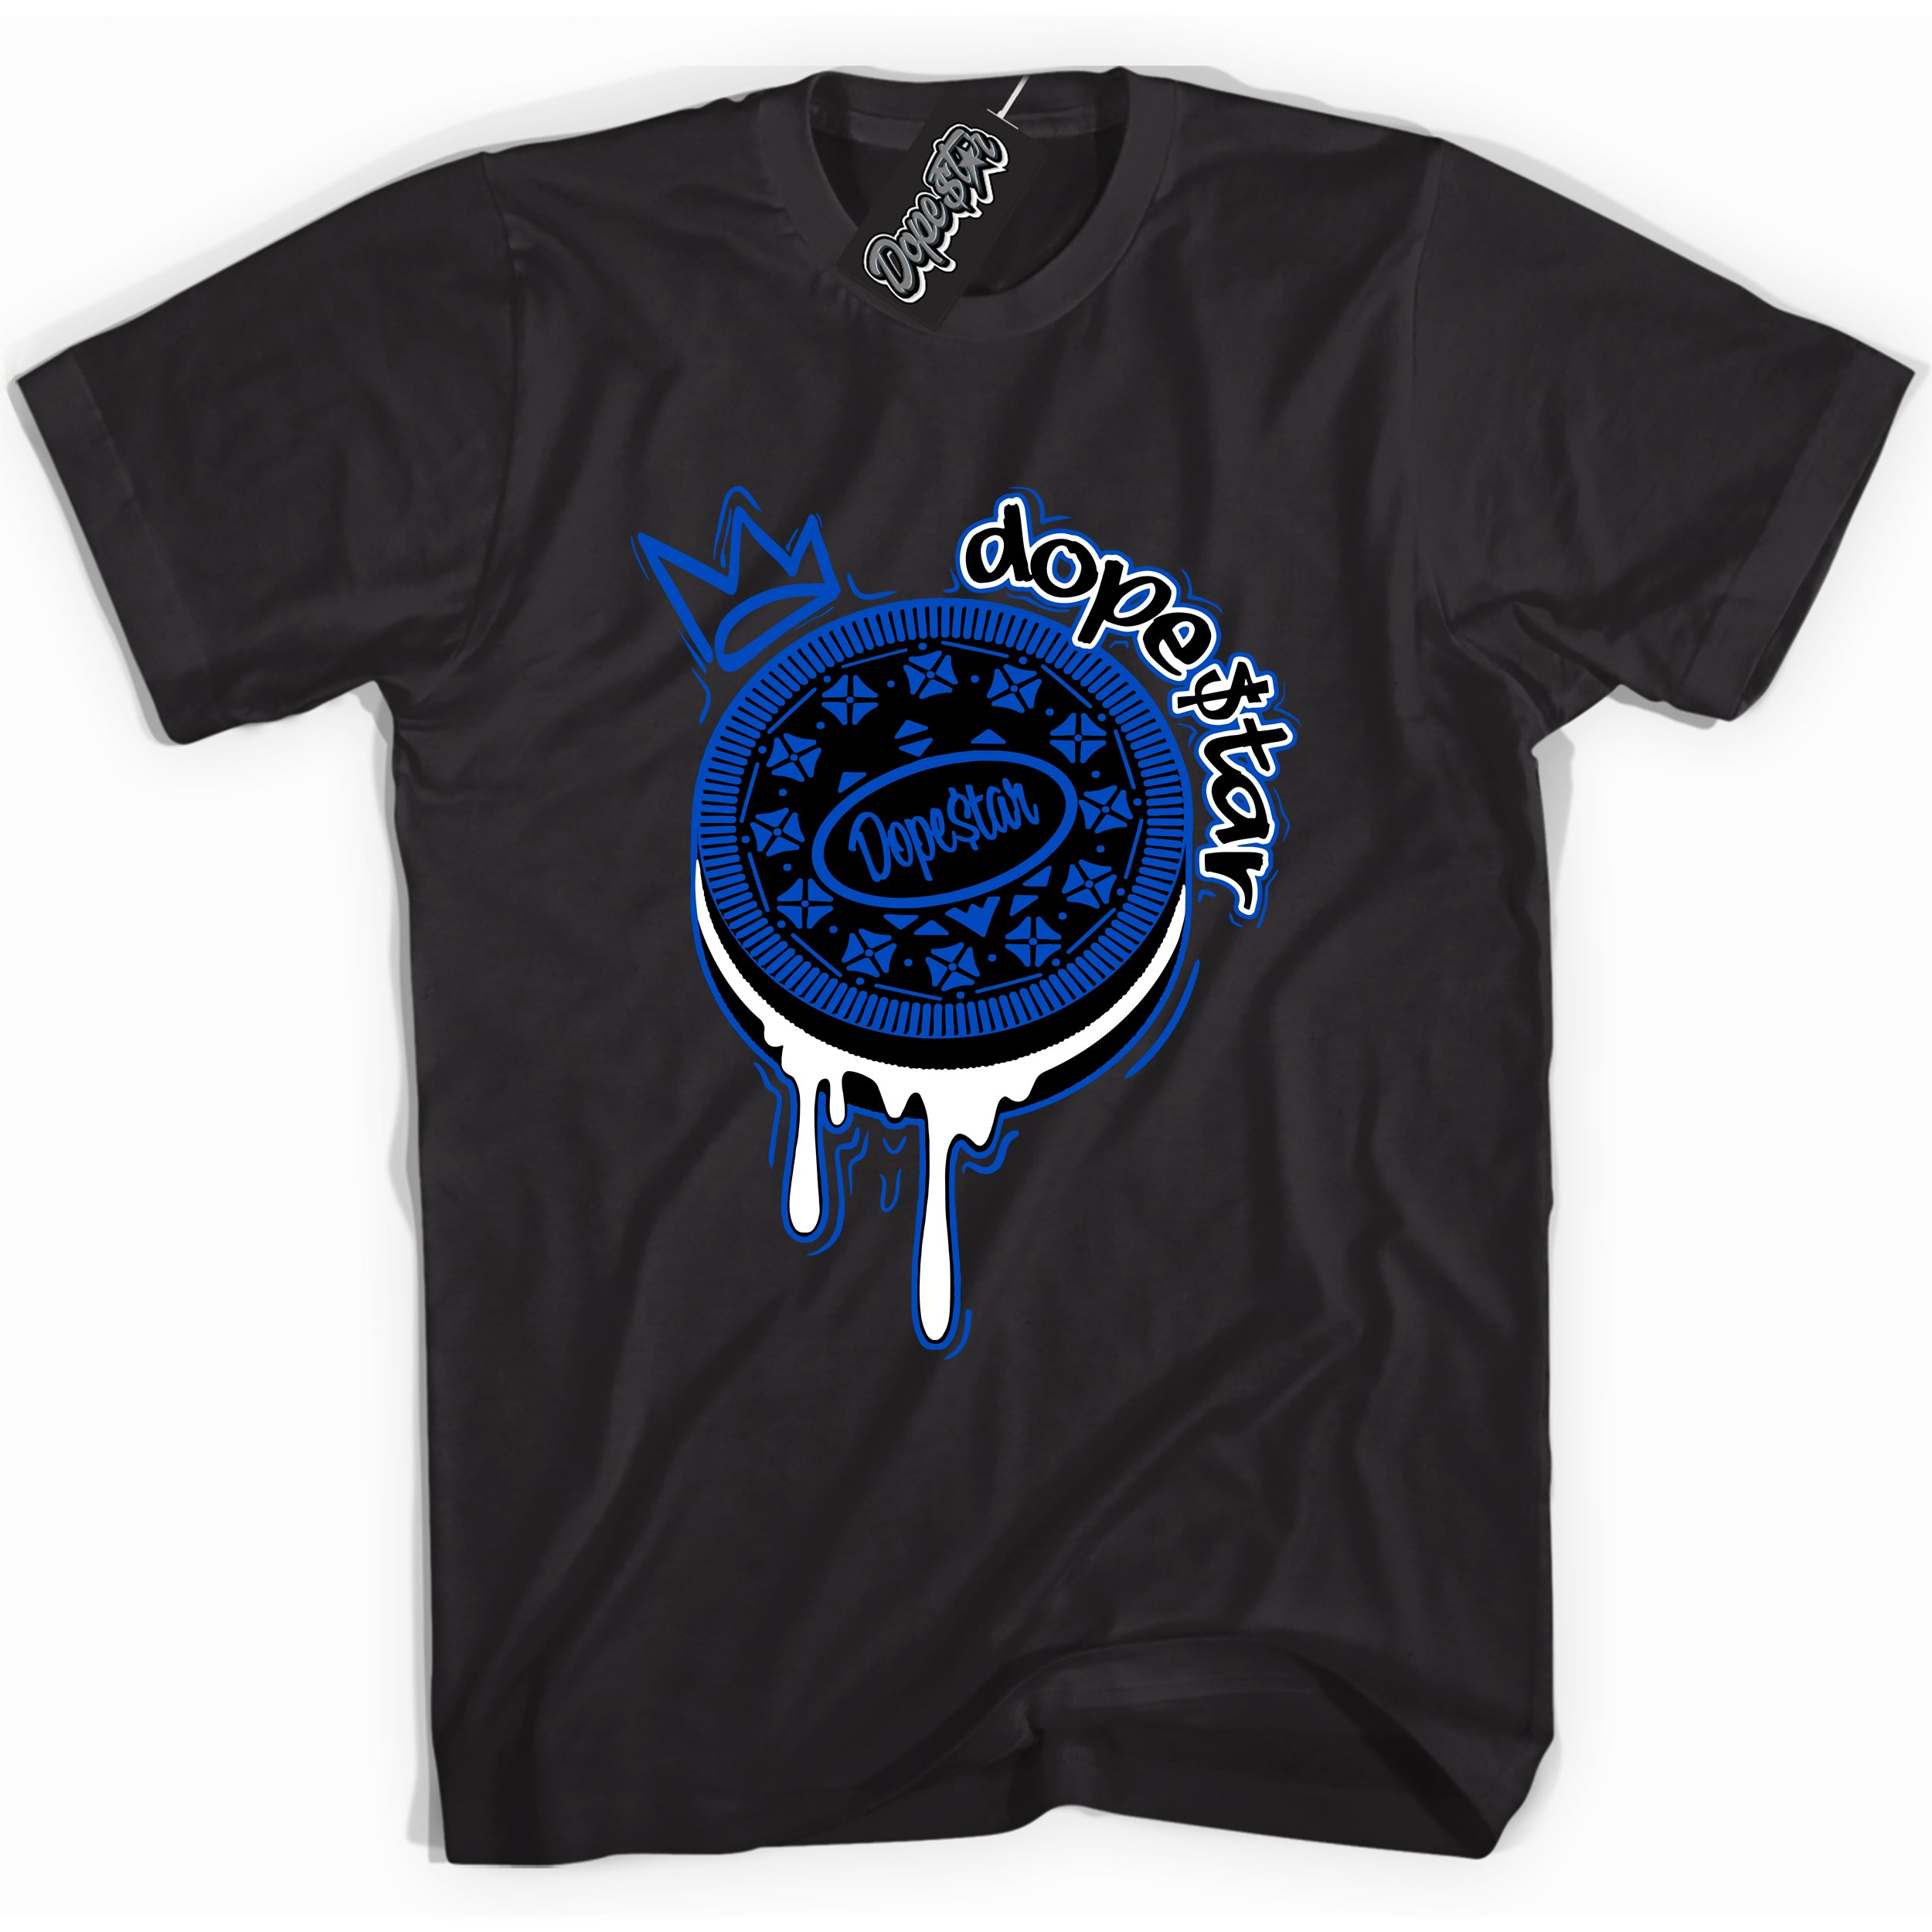 Cool Black graphic tee with Oreo DS print, that perfectly matches OG Royal Reimagined 1s sneakers 